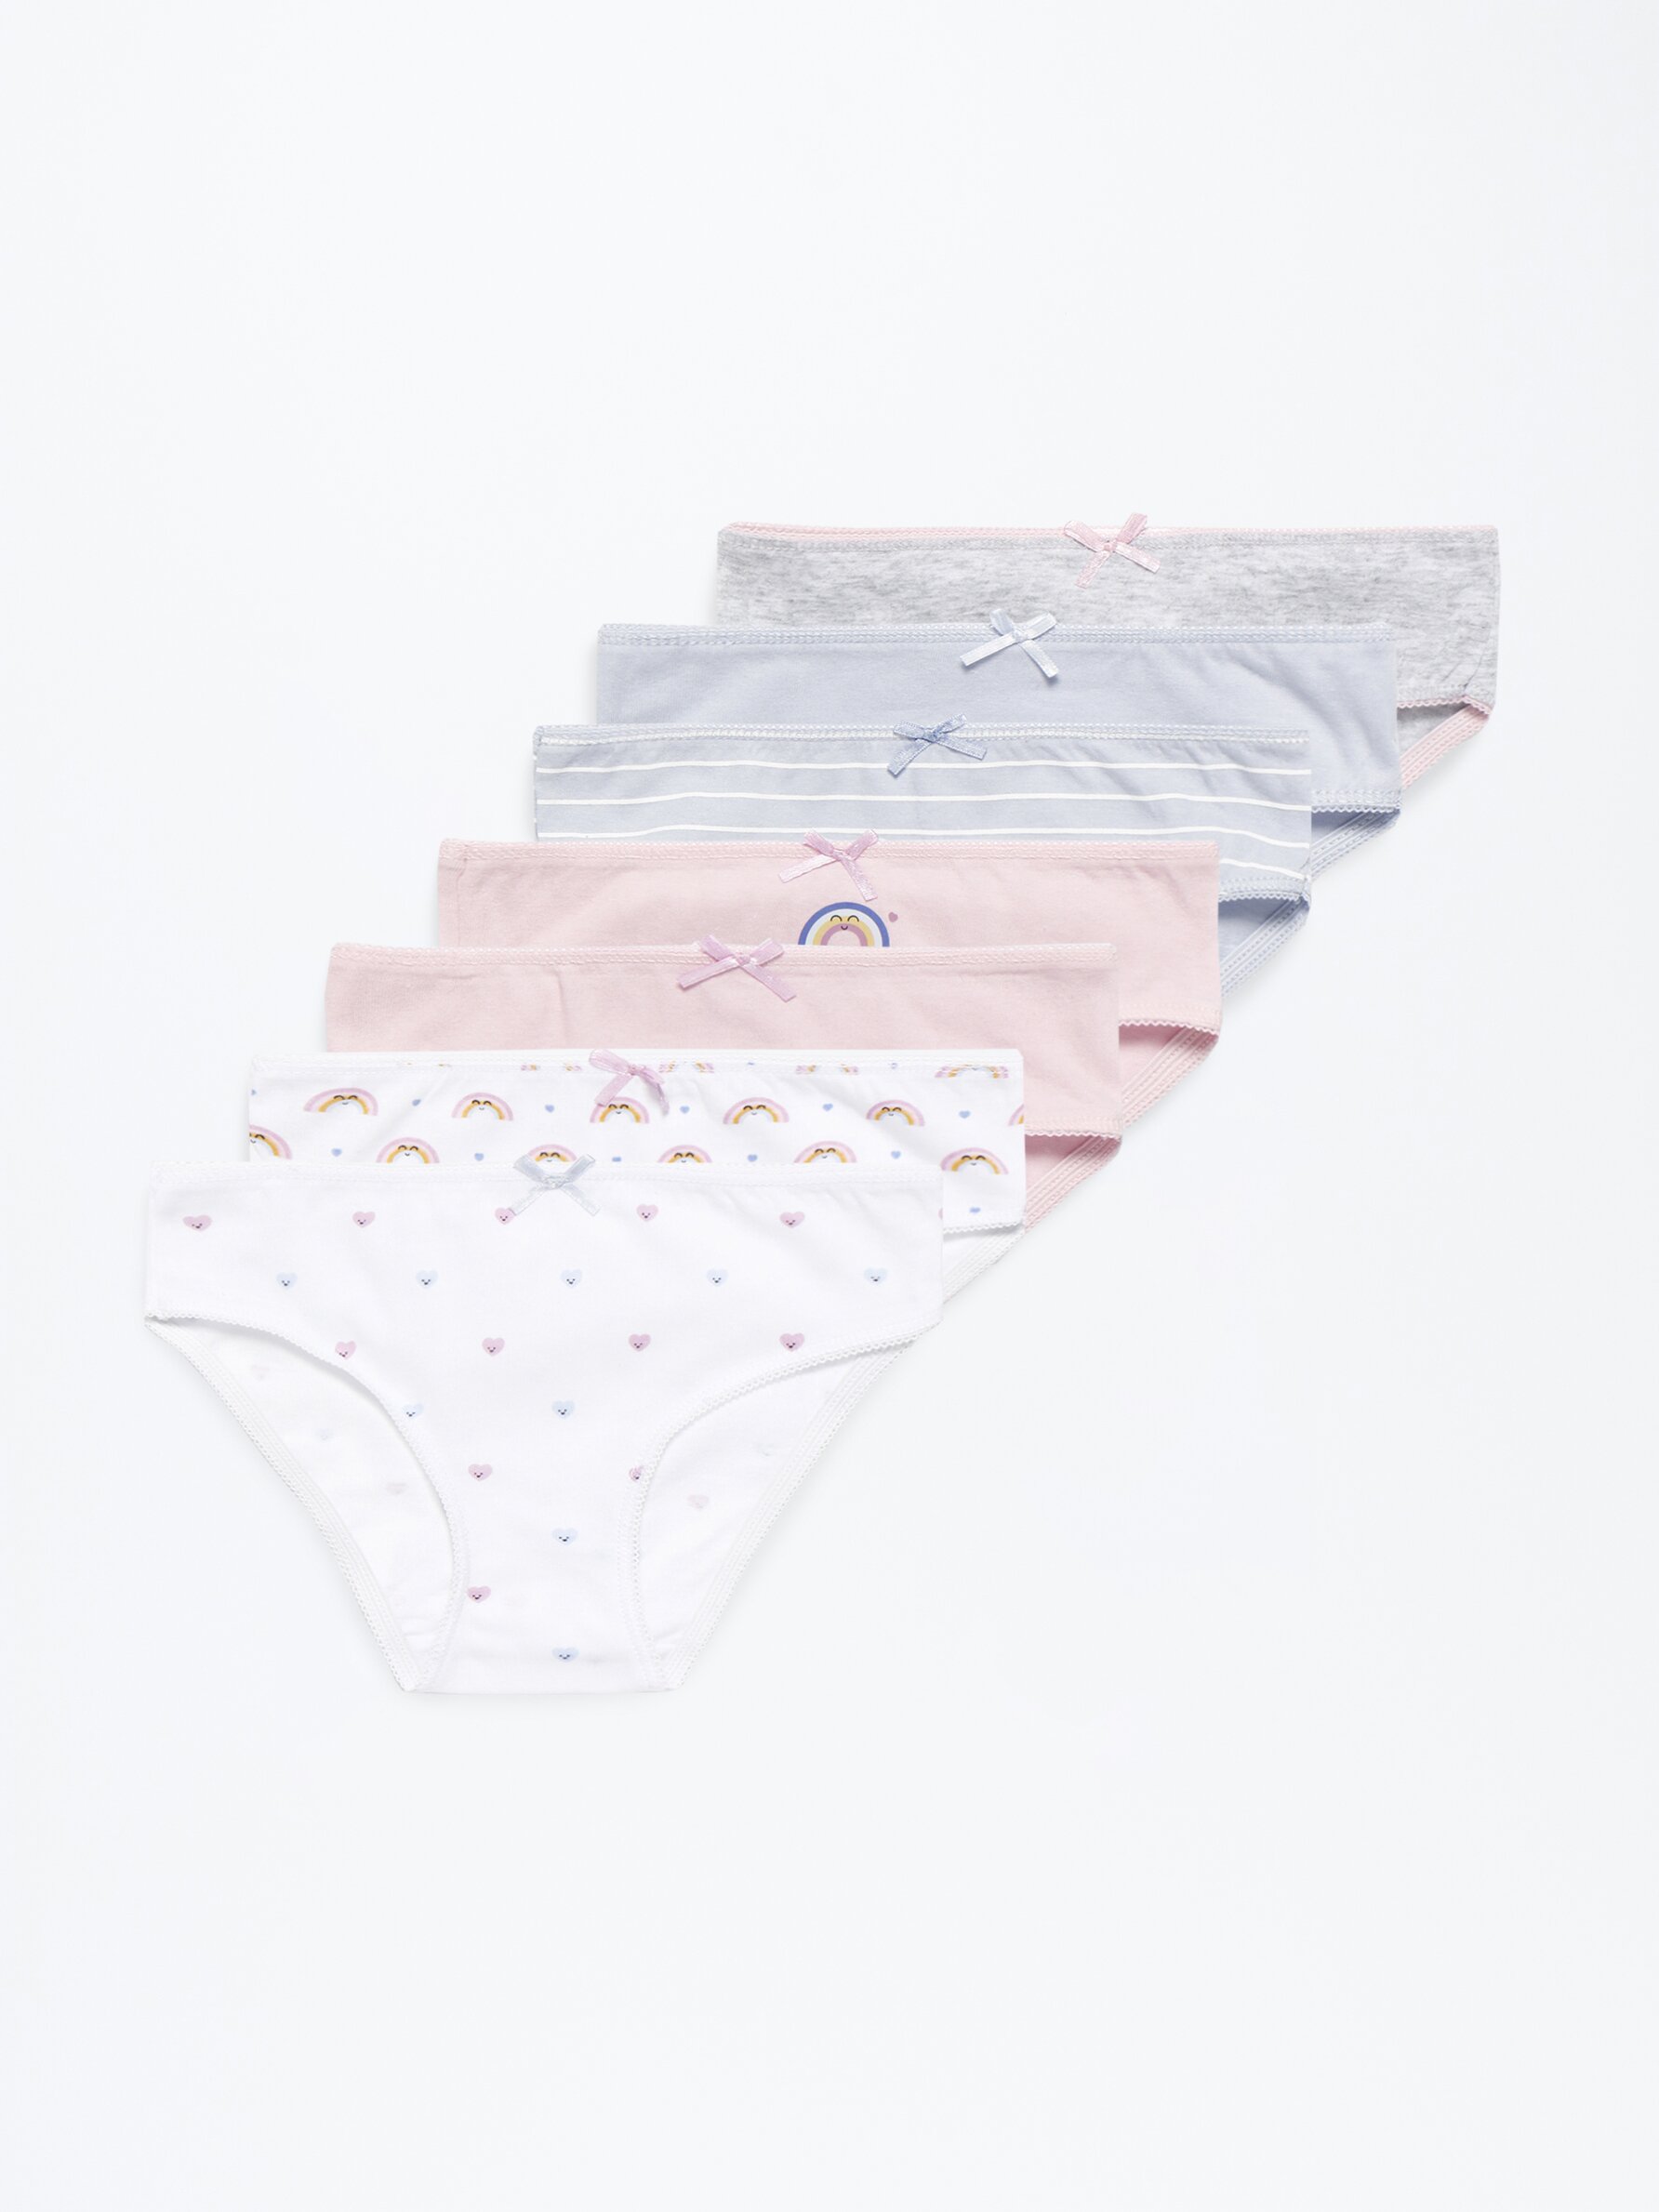 Baby Floral Panties - Softy